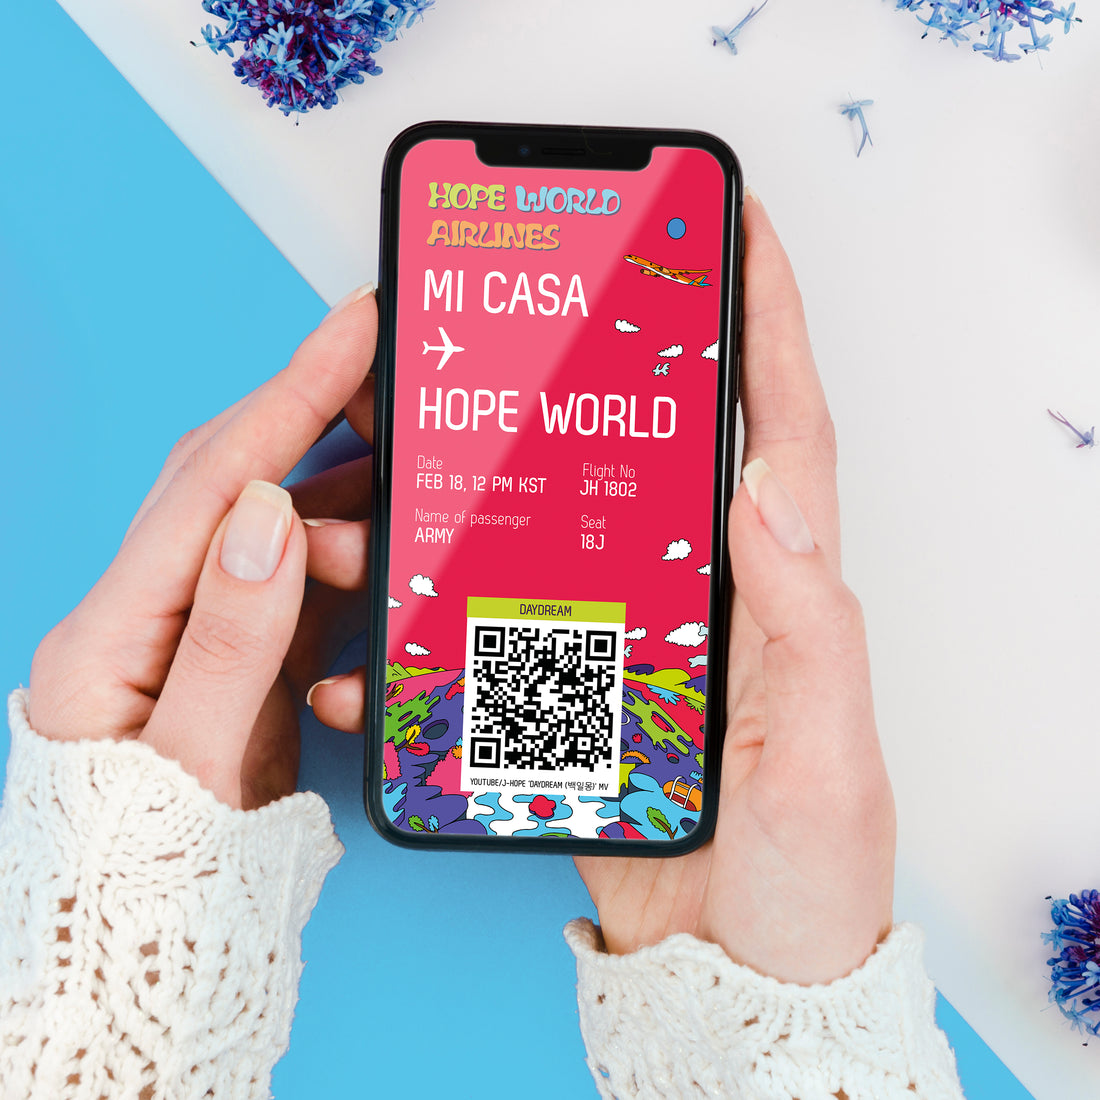 Mobile boarding pass to Hope World!